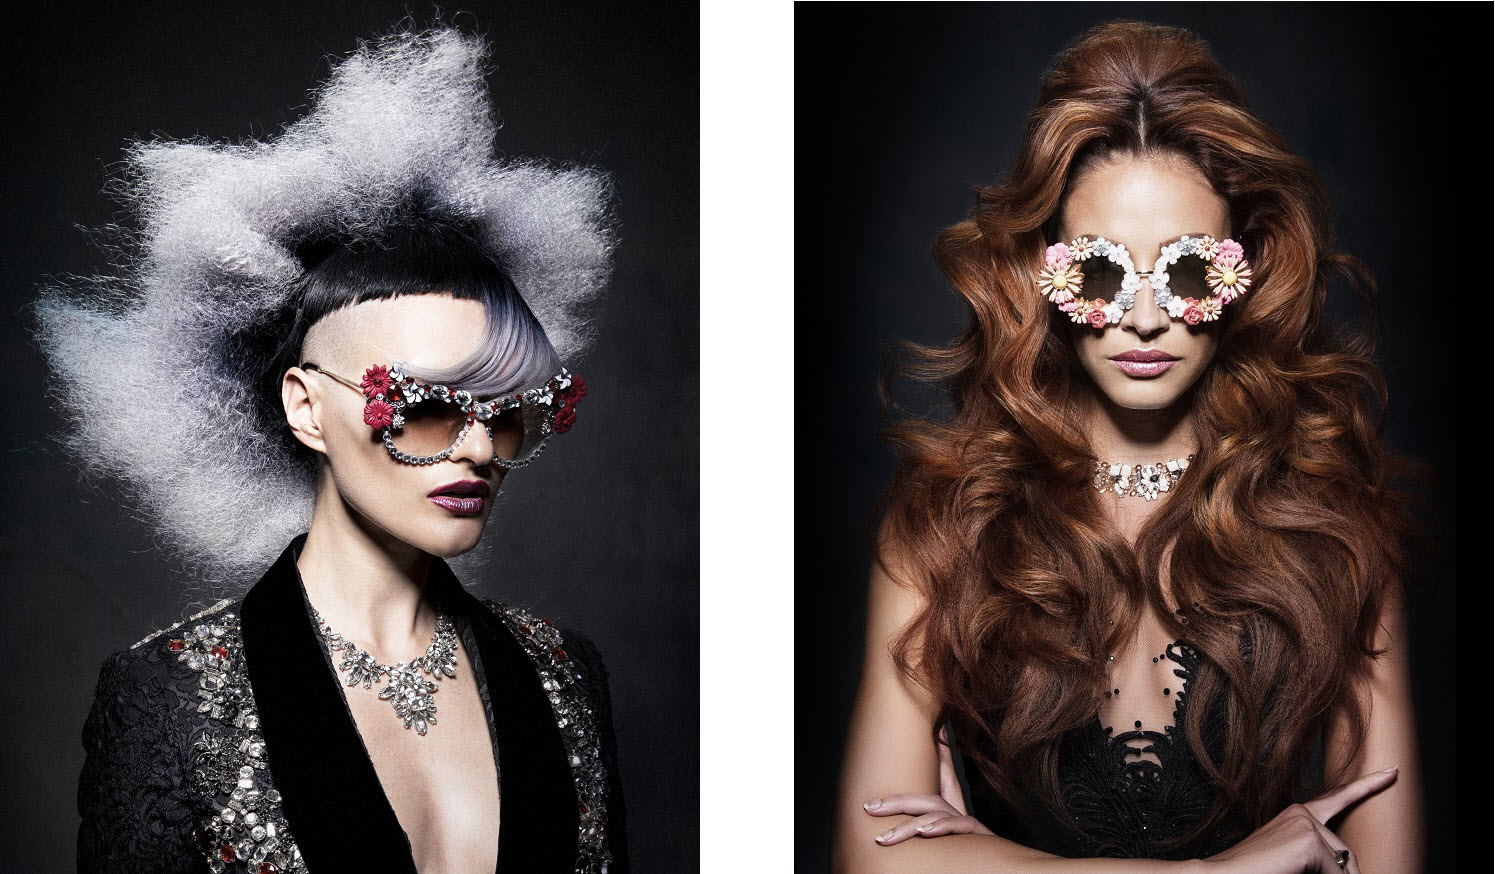 ch-naha-2019-finalists-hairstylist-of-the-year